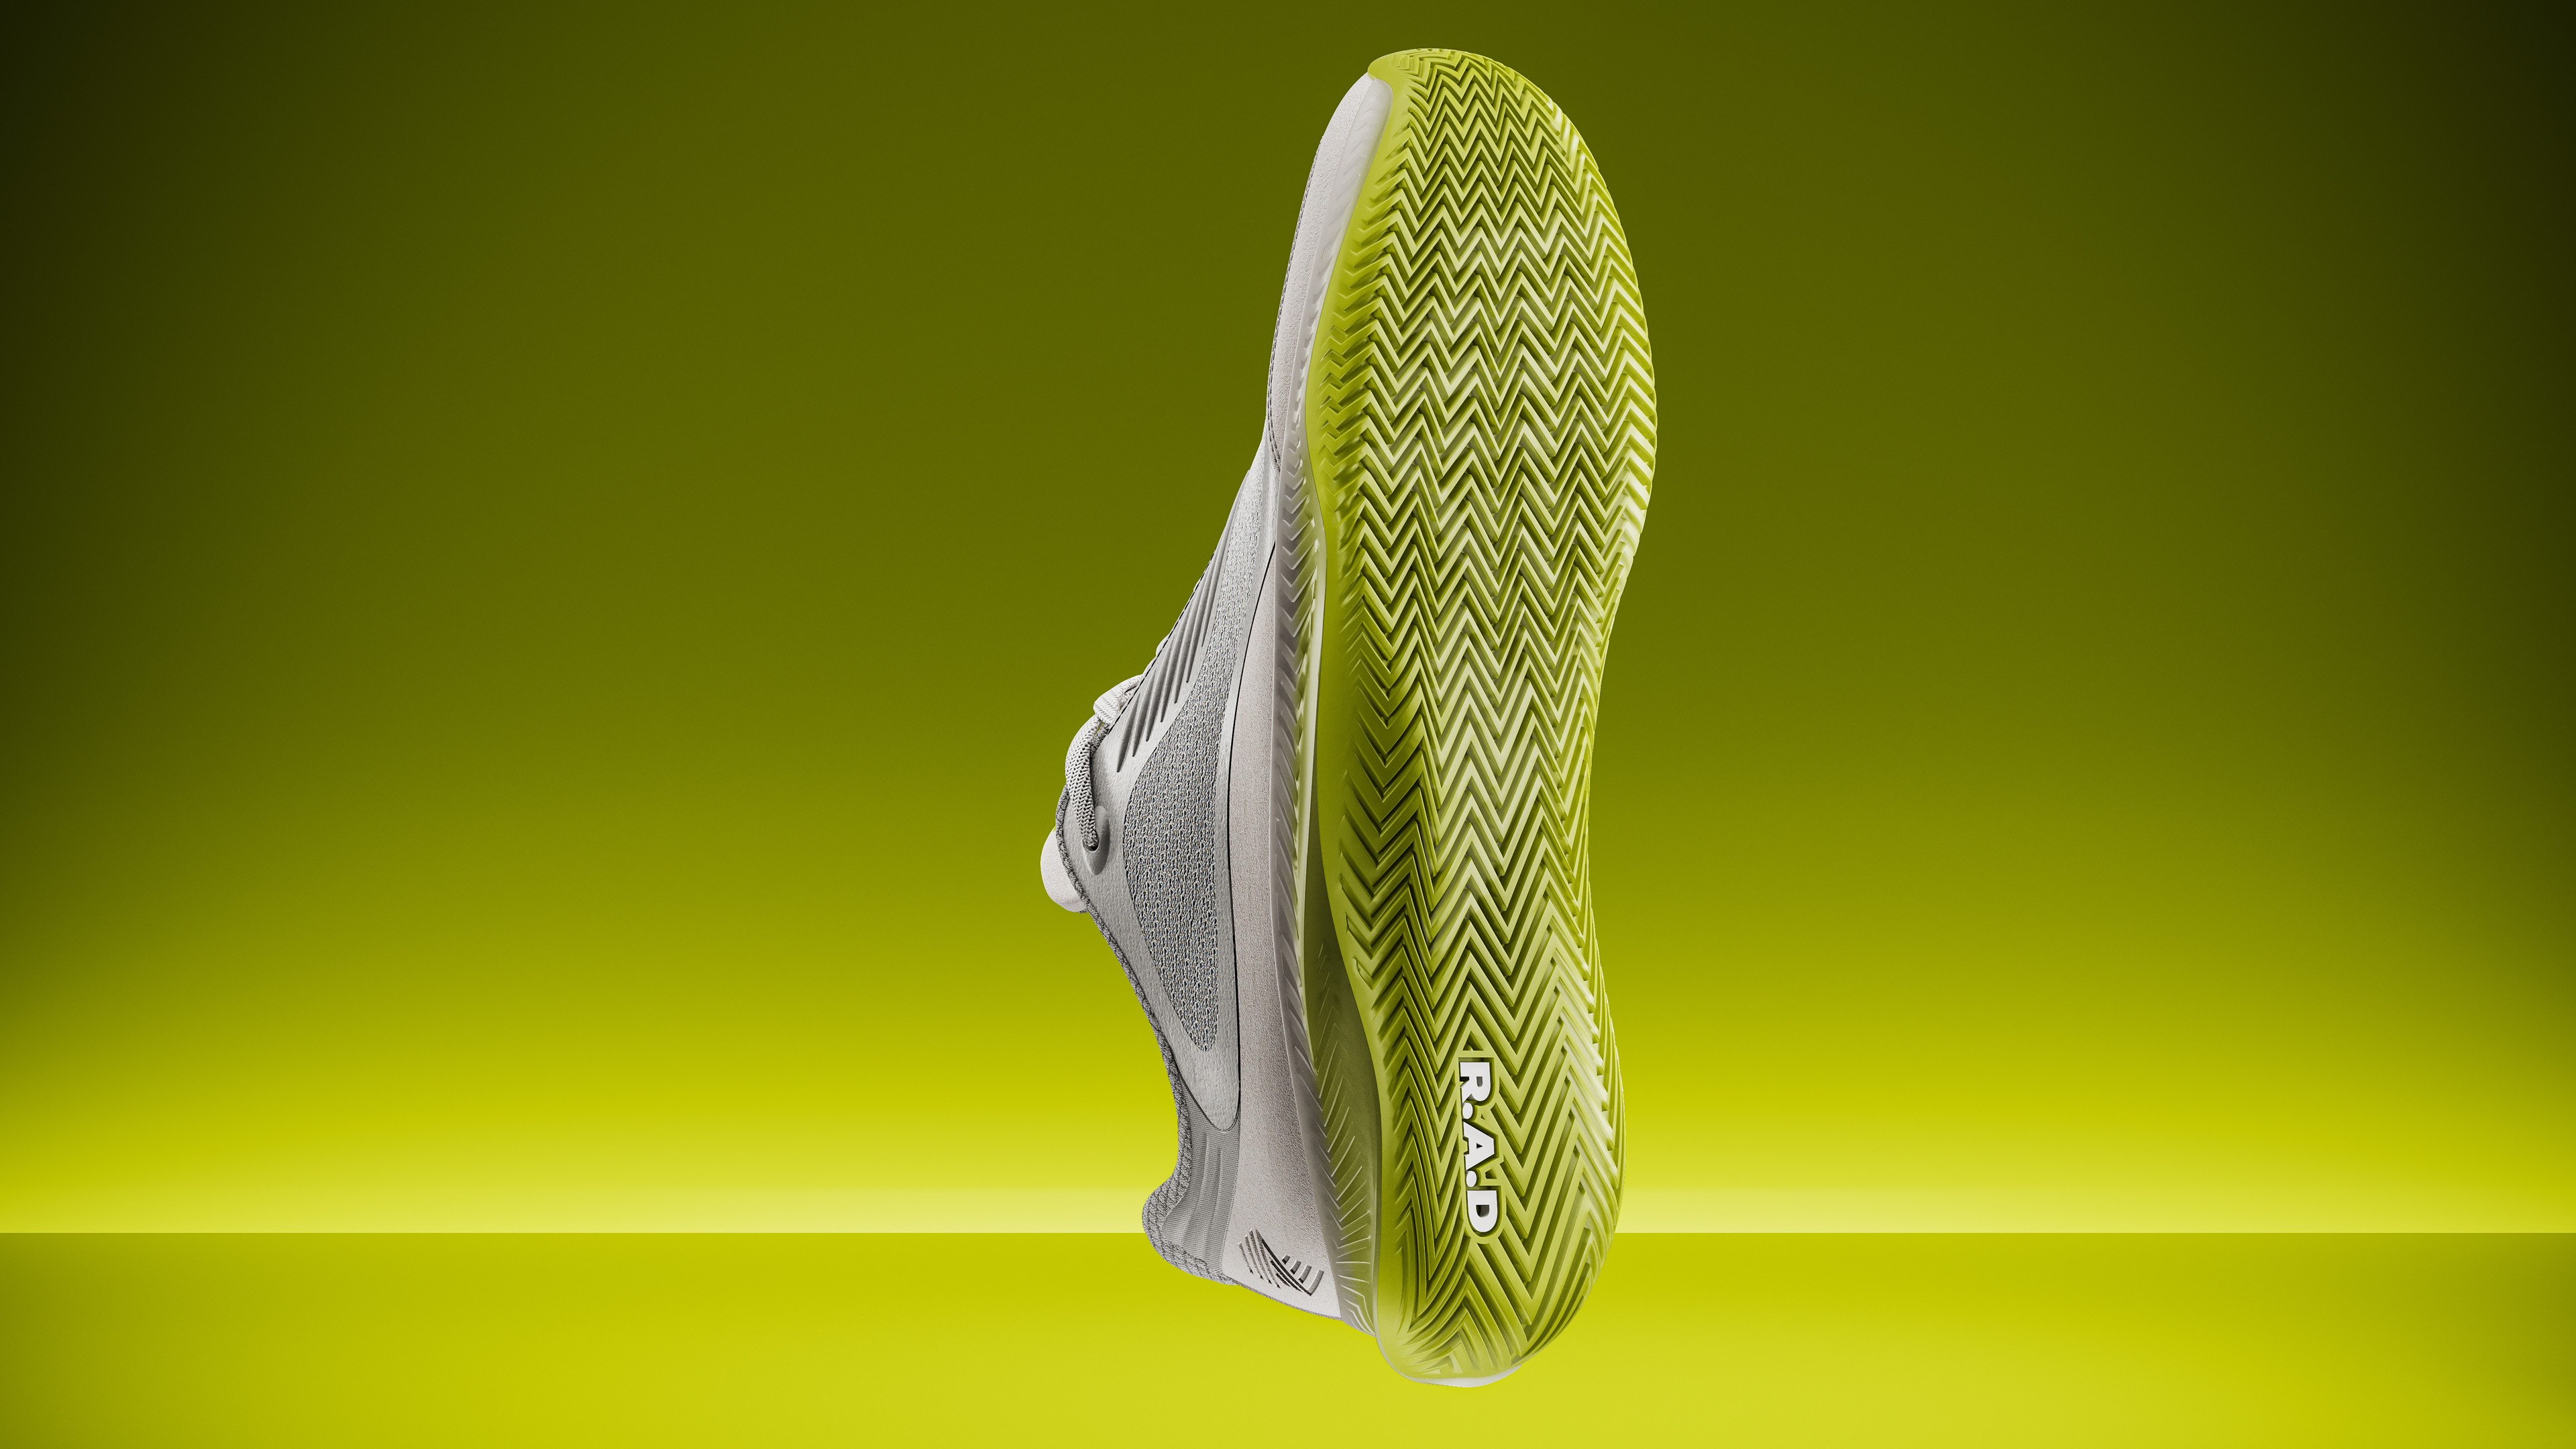 R.A.D. ONE Trainer - Product Shoe CGI 3D Visualisation